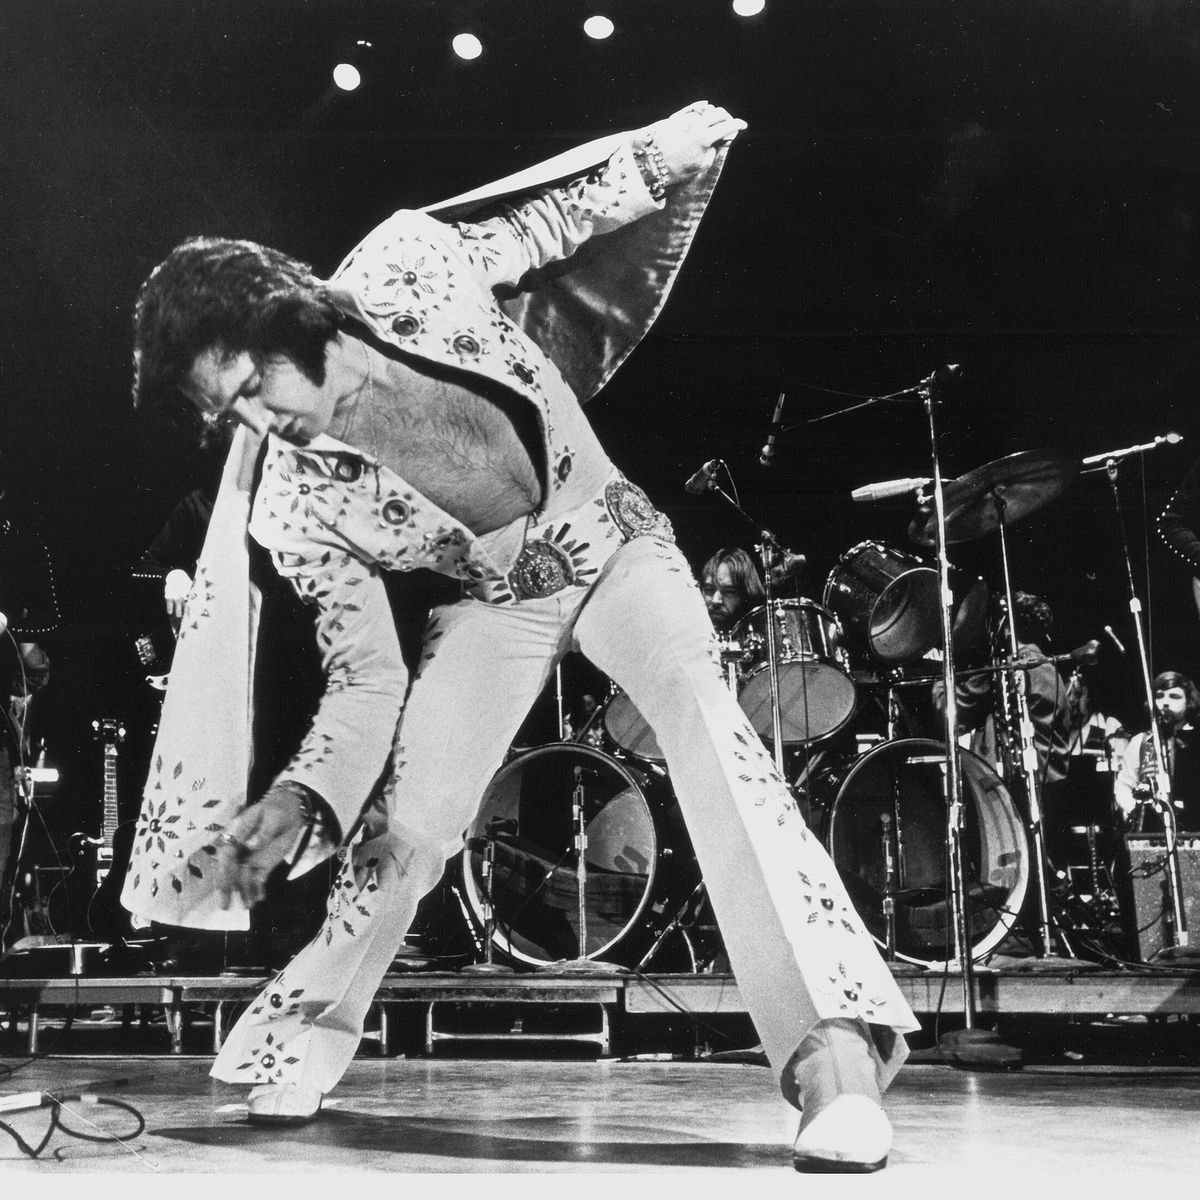 Why Elvis Is Still A Style Icon  At 85, Elvis Presley Still Influences  Men's Fashion